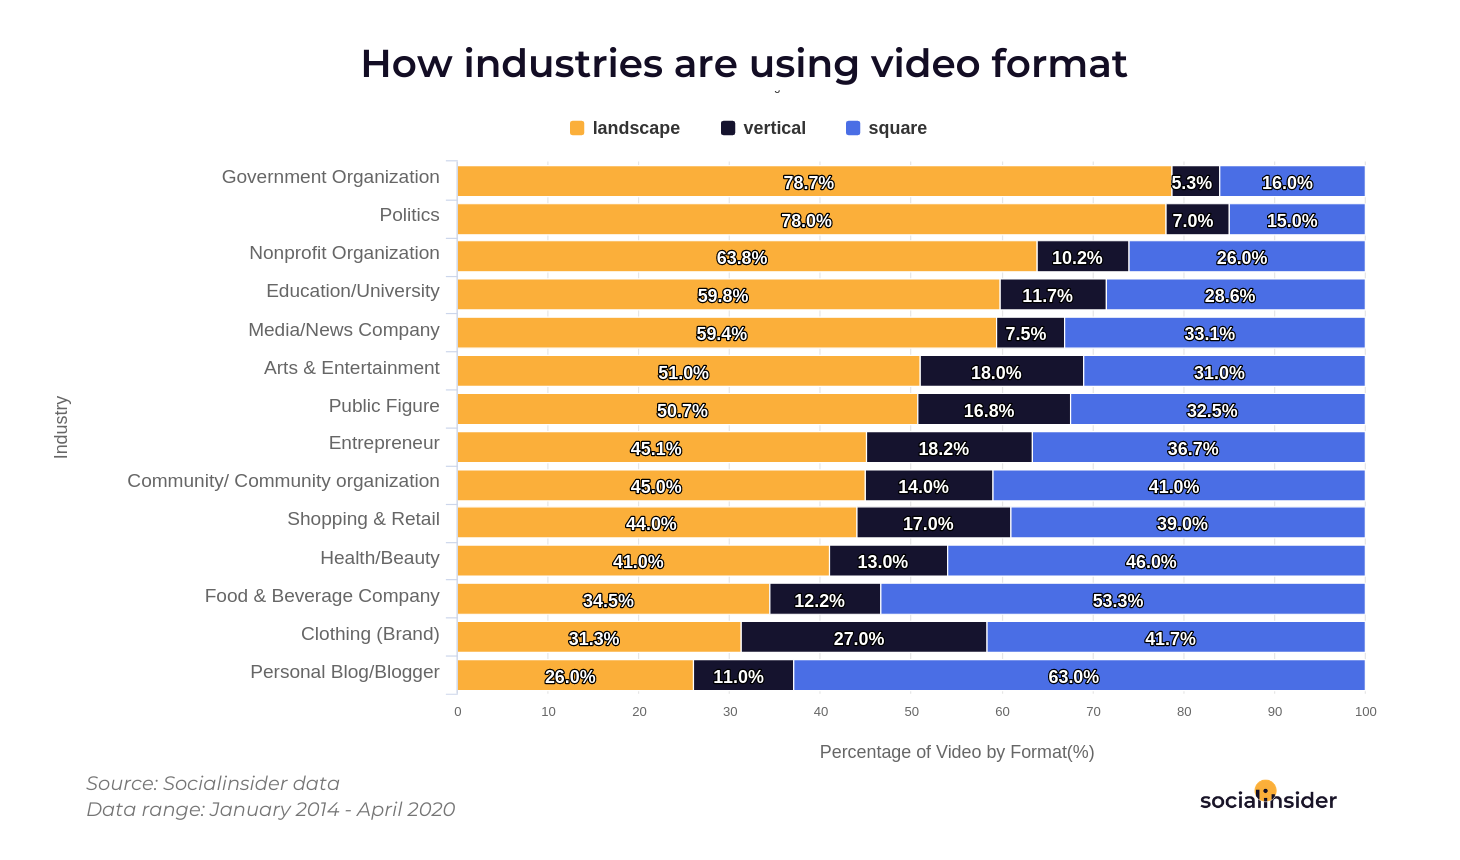 Industries using video formats.